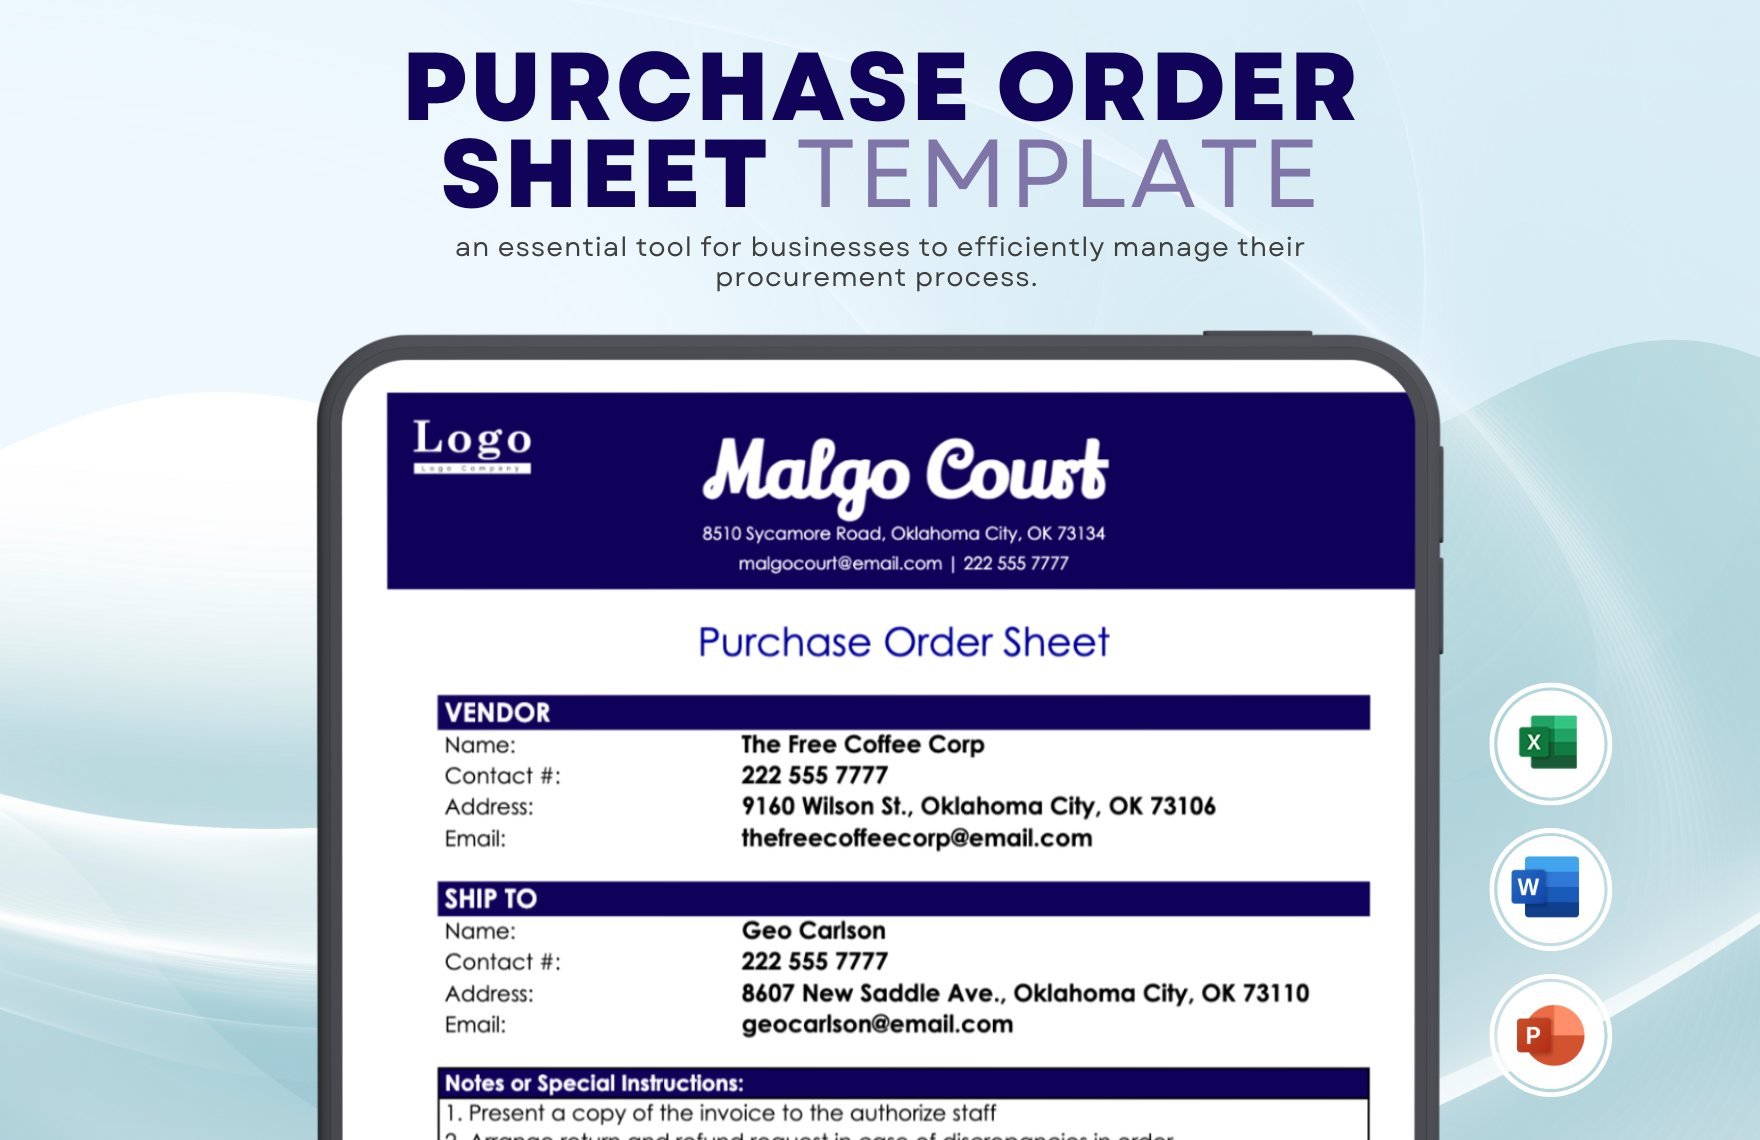 Free Purchase Order Sheet Template in Excel, Google Sheets, PowerPoint